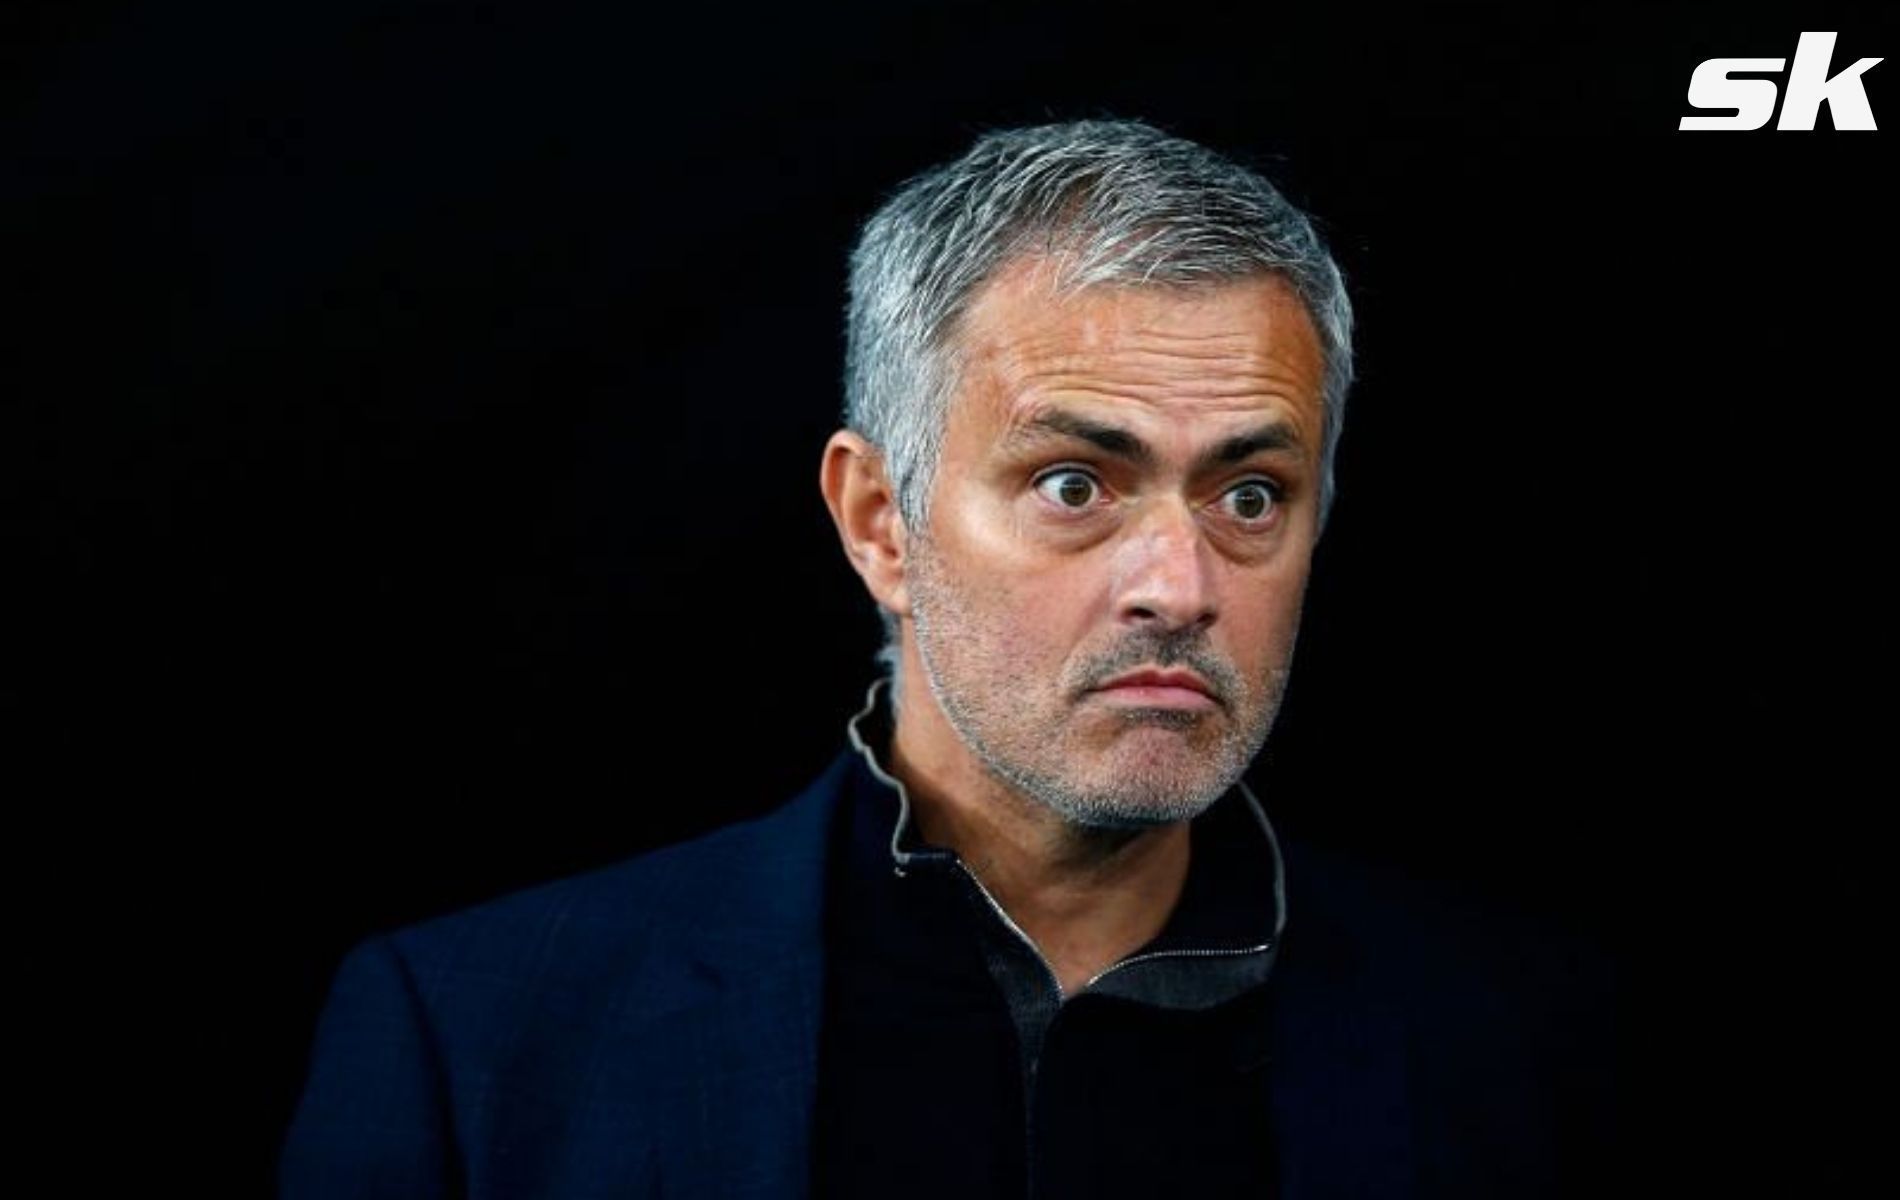 Jose Mourinho has suffered a few chastening defeats in his managerial career. thus far.